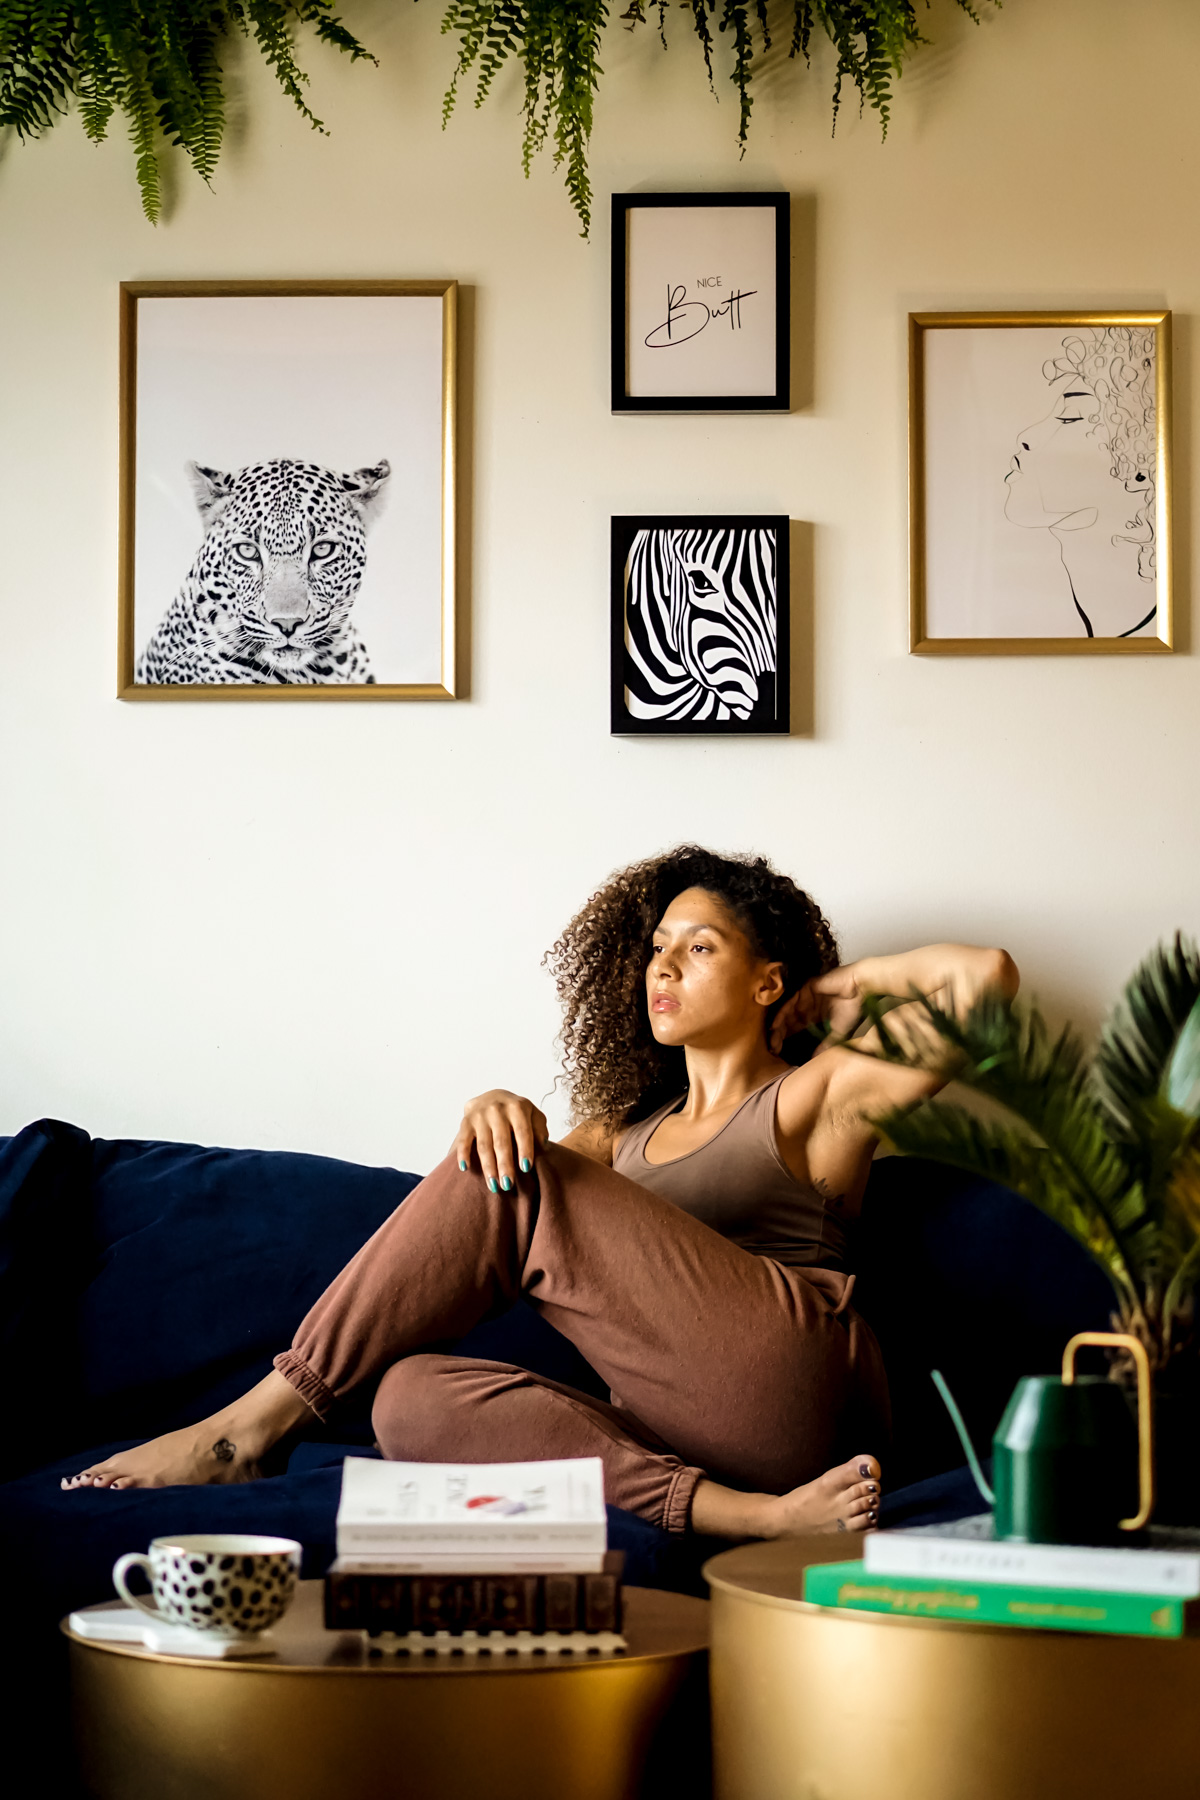 lounge wear around the house, black fashion blogger outfit inspiration, where to buy affordable summer lounge wear, shopping guides, lounge wear outfits black girl, clothes hacks fashion tips and tricks